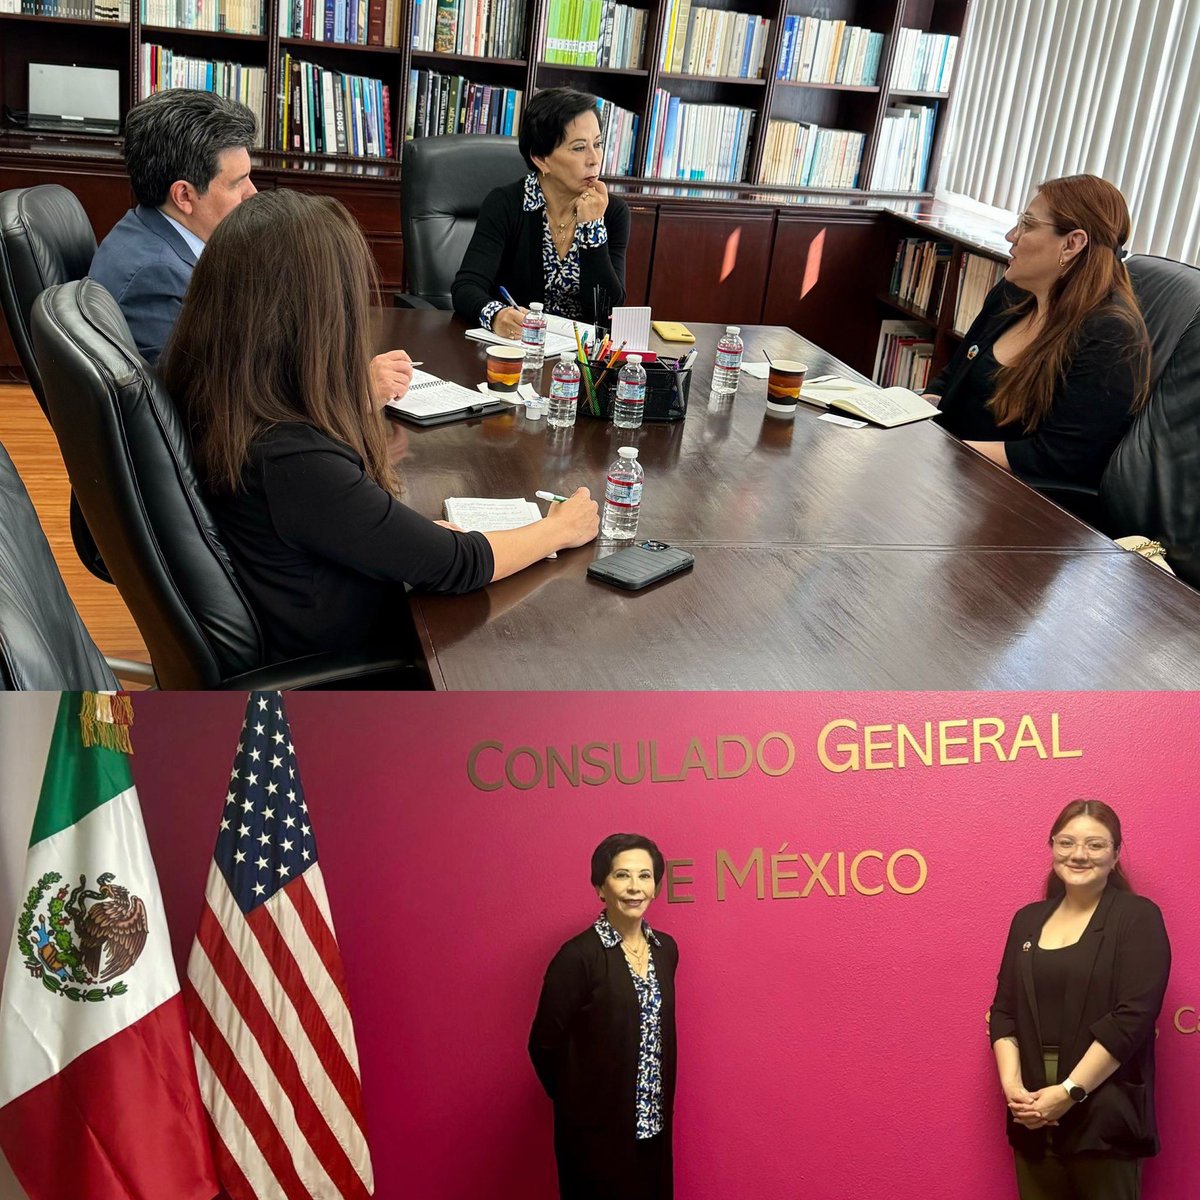 This consular representation and @CHIRLA are longstanding partners in the fight to preserve human rights and dignity. Today our Consul General welcomed @_esme9_ and had a thorough conversation regarding border issues and migration